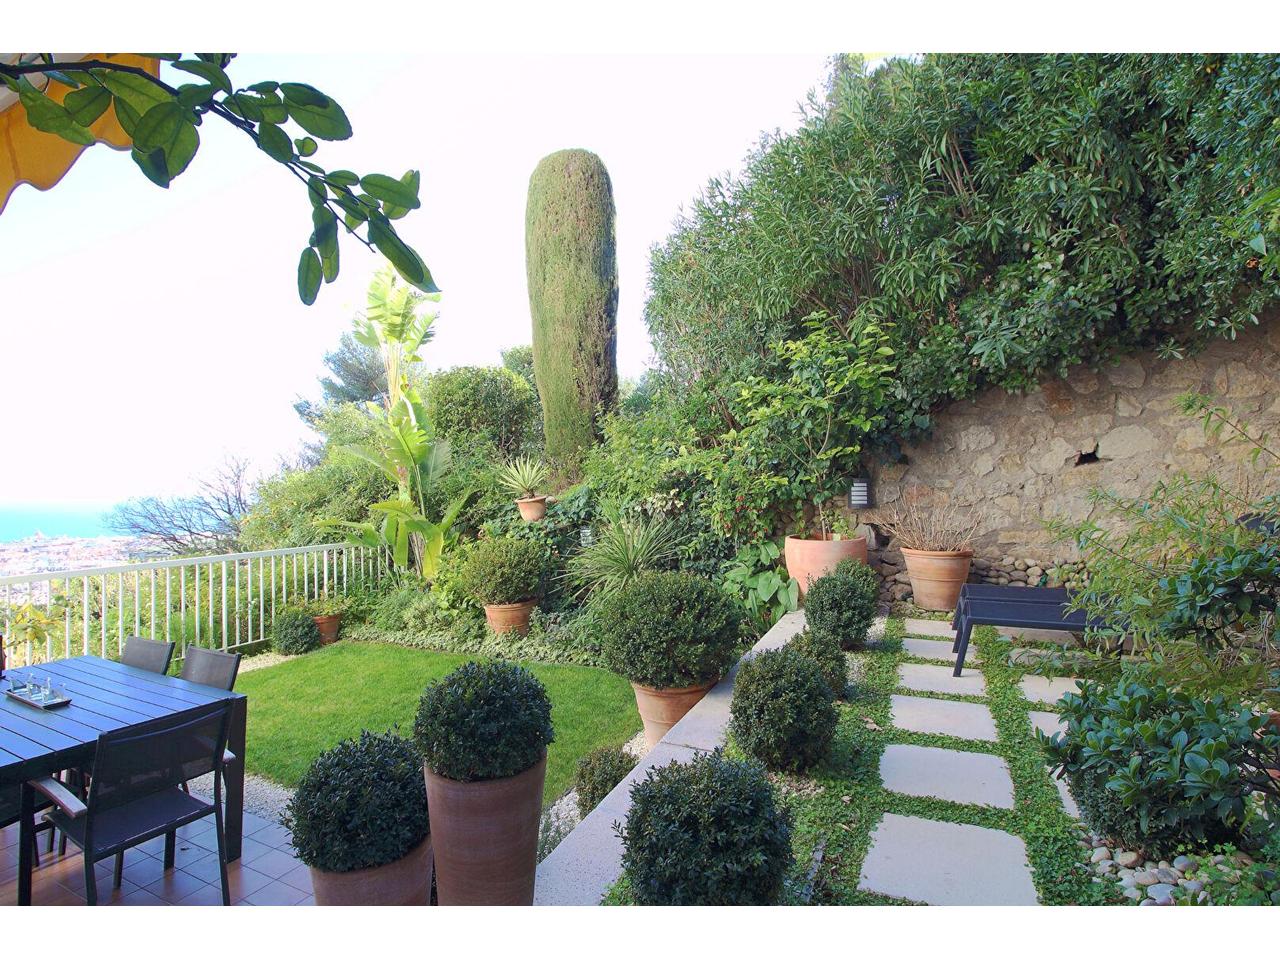 Nice Riviera - Real estate agency Nice Côte d'Azur | Appartement  2 Rooms 45.74m2  for sale   399 500 €